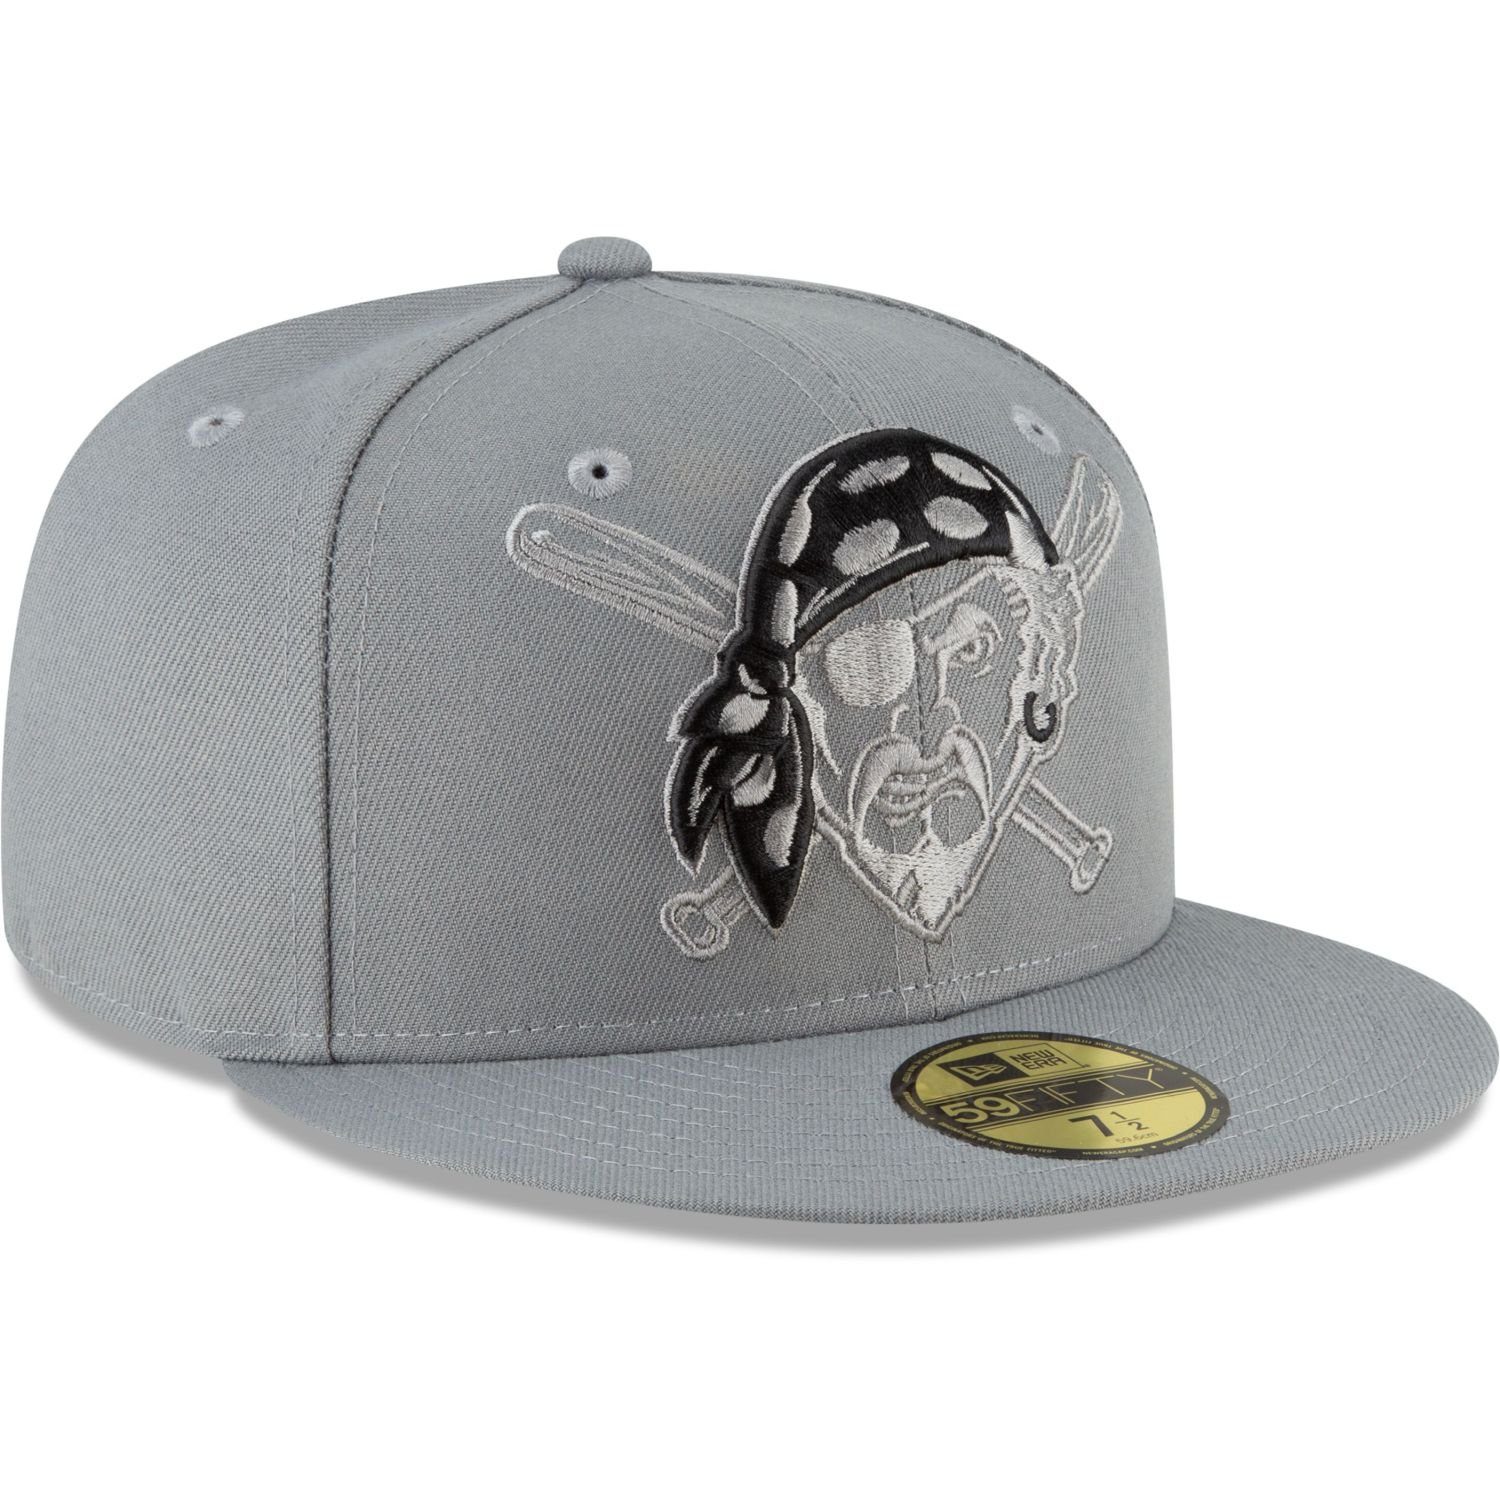 GREY Fitted Era Cooperstown New 59Fifty MLB Pirates Cap STORM Team Pittsburgh